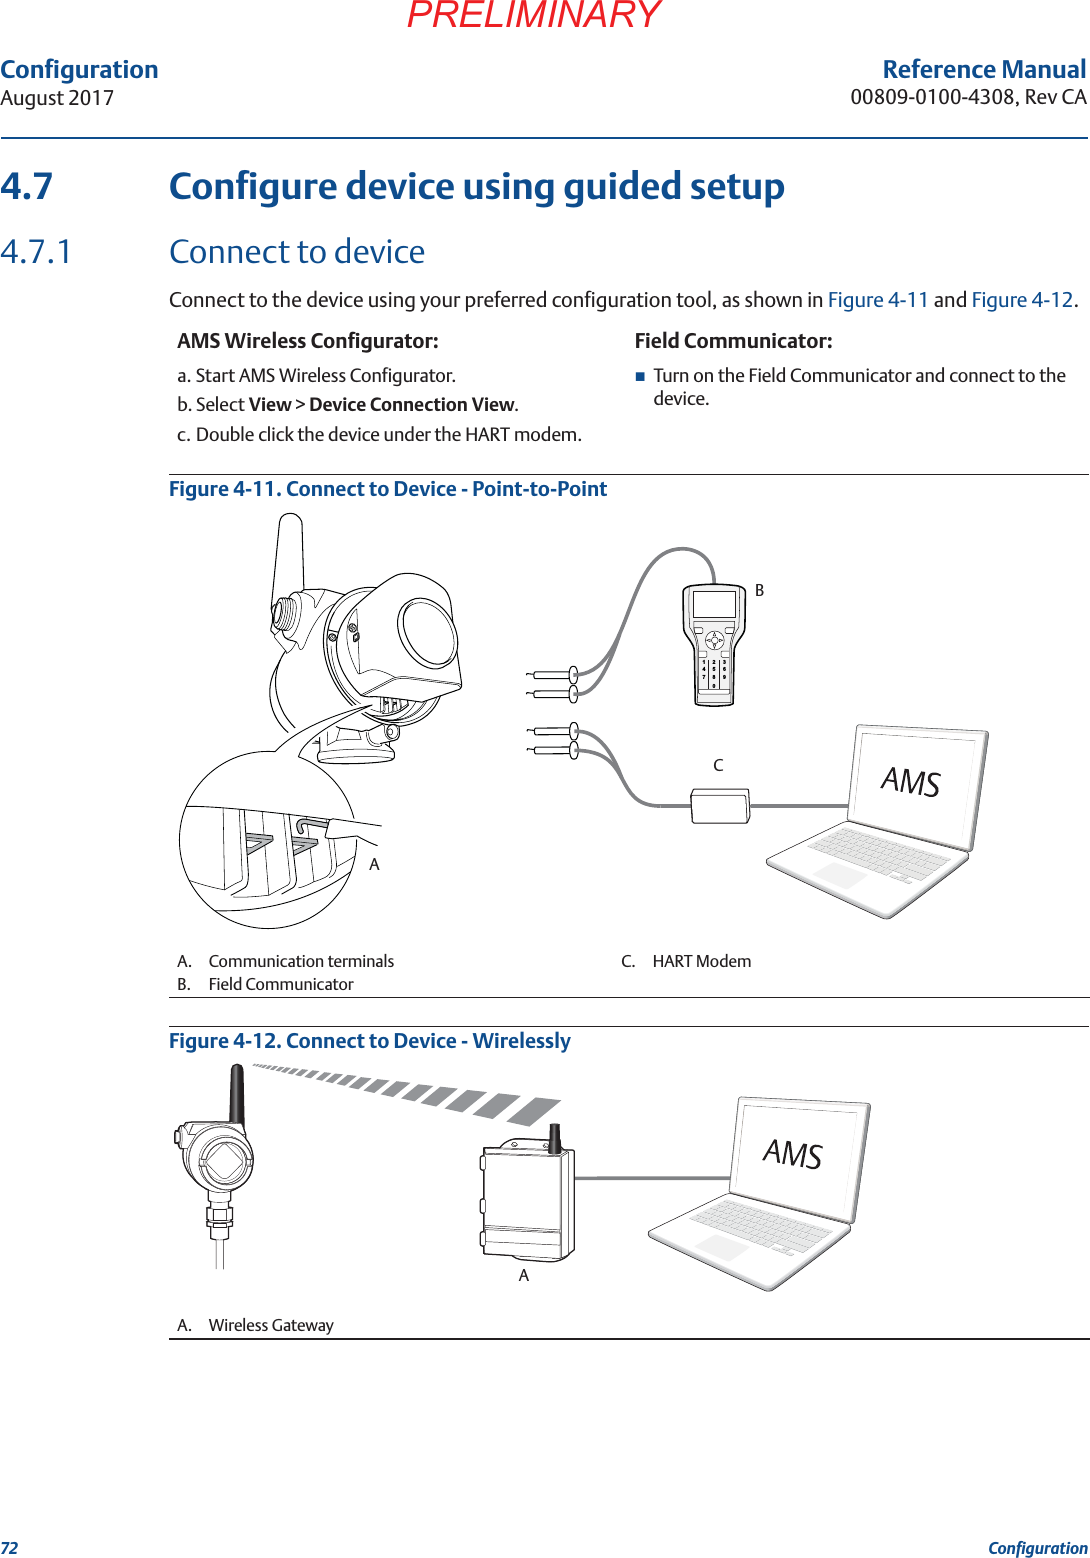 72ConfigurationAugust 2017ConfigurationPRELIMINARYReference Manual00809-0100-4308, Rev CA4.7 Configure device using guided setup4.7.1 Connect to deviceConnect to the device using your preferred configuration tool, as shown in Figure 4-11 and Figure 4-12.Figure 4-11. Connect to Device - Point-to-PointFigure 4-12. Connect to Device - WirelesslyAMS Wireless Configurator: Field Communicator:a. Start AMS Wireless Configurator.b. Select View &gt; Device Connection View.c. Double click the device under the HART modem.Turn on the Field Communicator and connect to the device.A. Communication terminals C. HART ModemB. Field CommunicatorA. Wireless Gateway12 345 67809ABCA